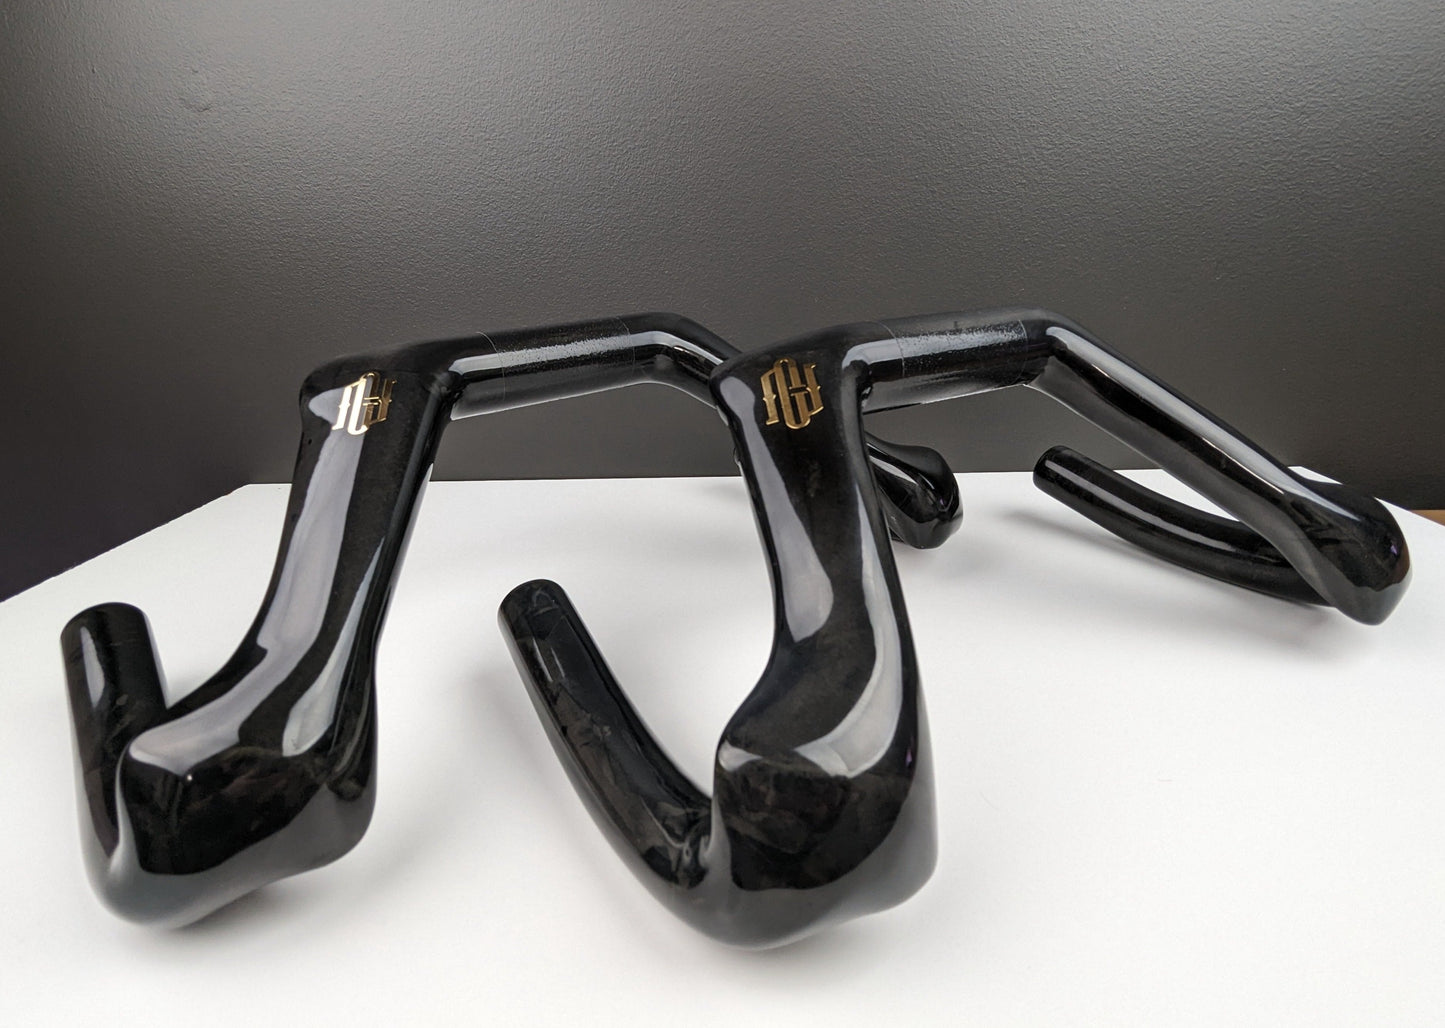 ARES carbon TORAY1000 sprint handlebars by Novacorona, 330mm and 290mm